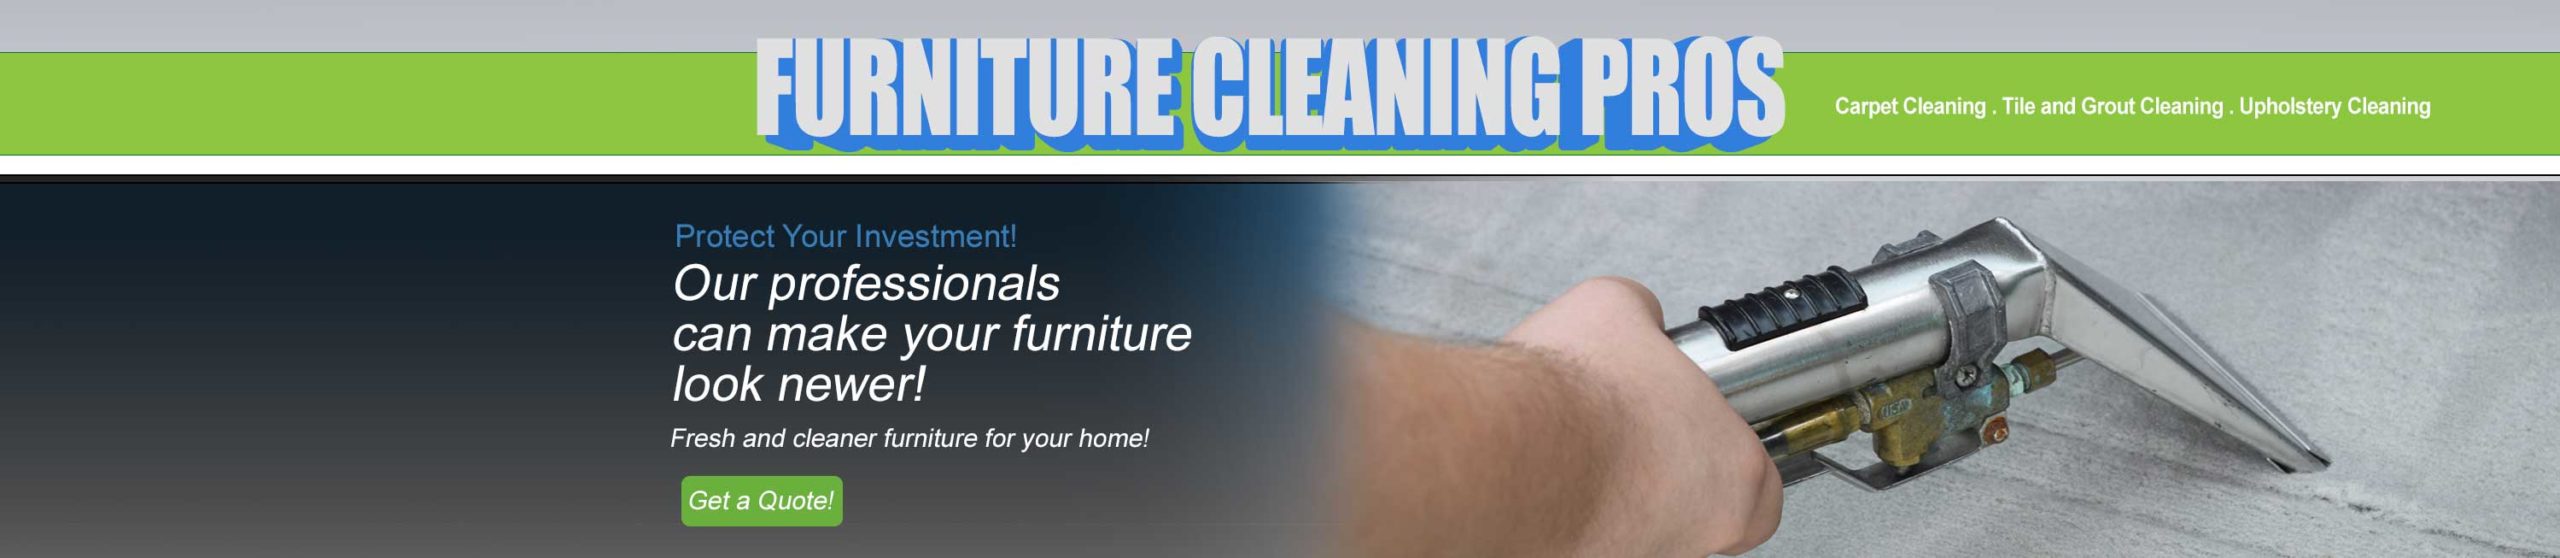 Furniture and upholstery cleaning in El Mirage AZ